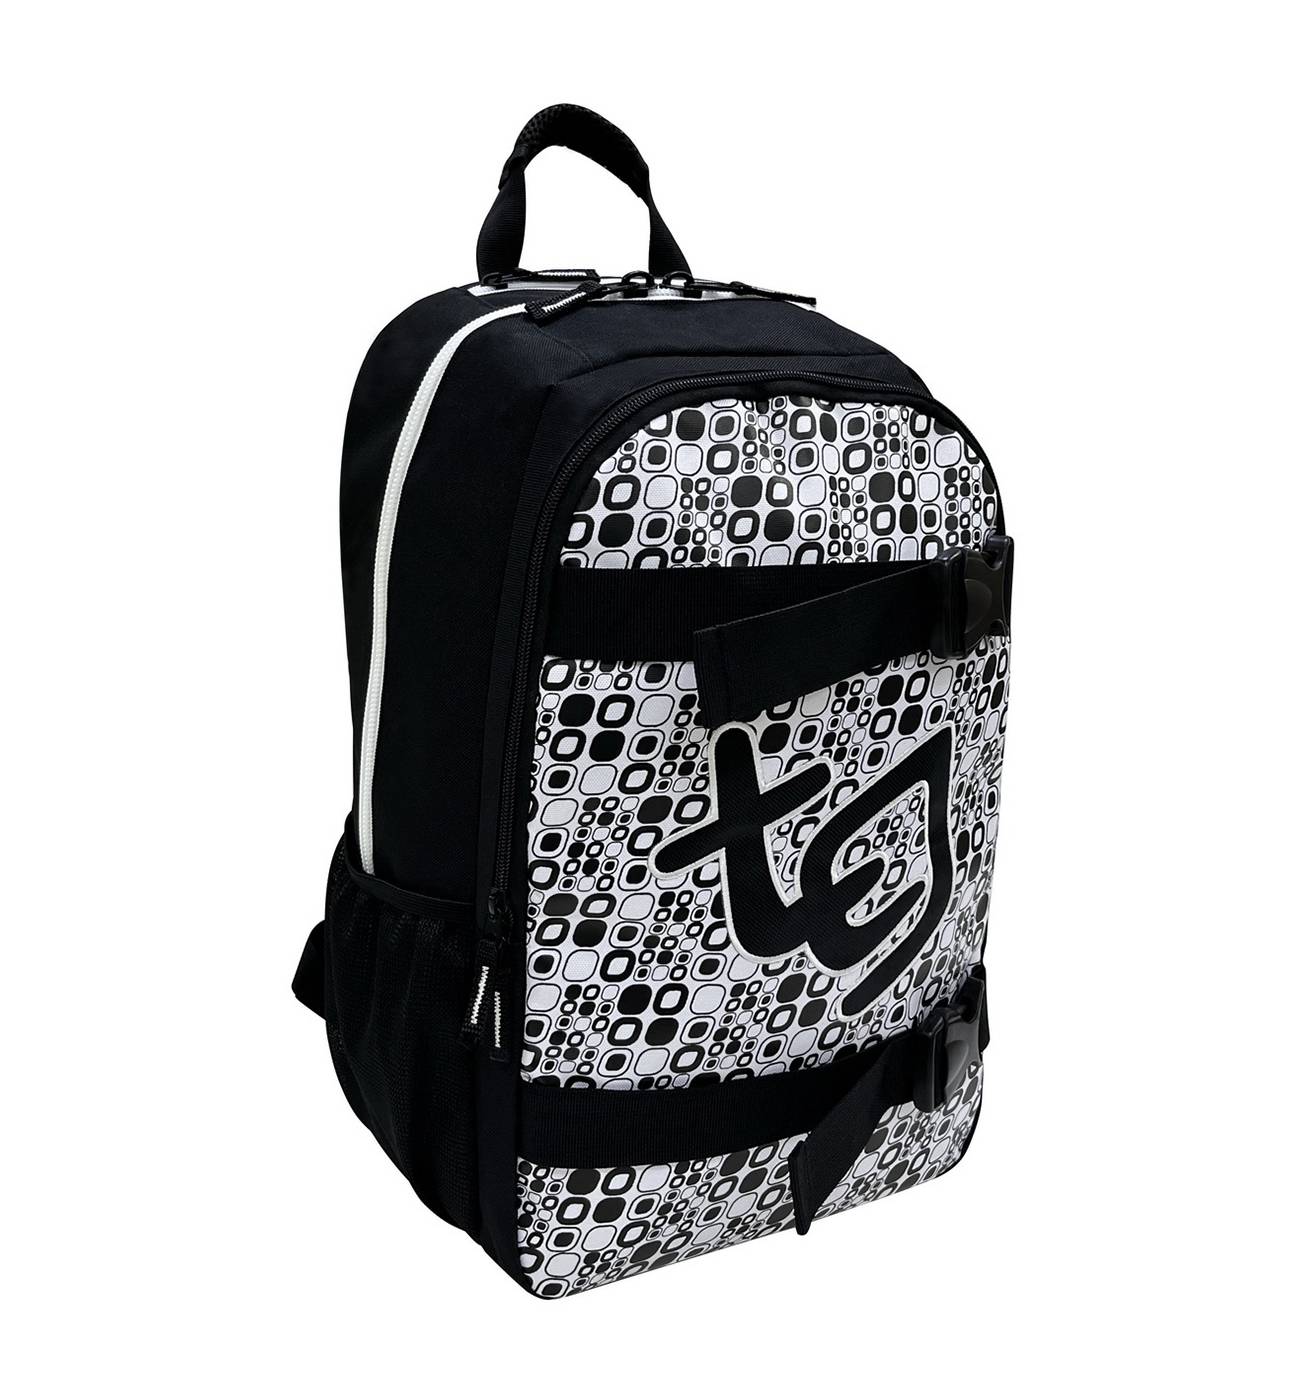 Tech Gear Park Central Backpack - Black; image 3 of 3